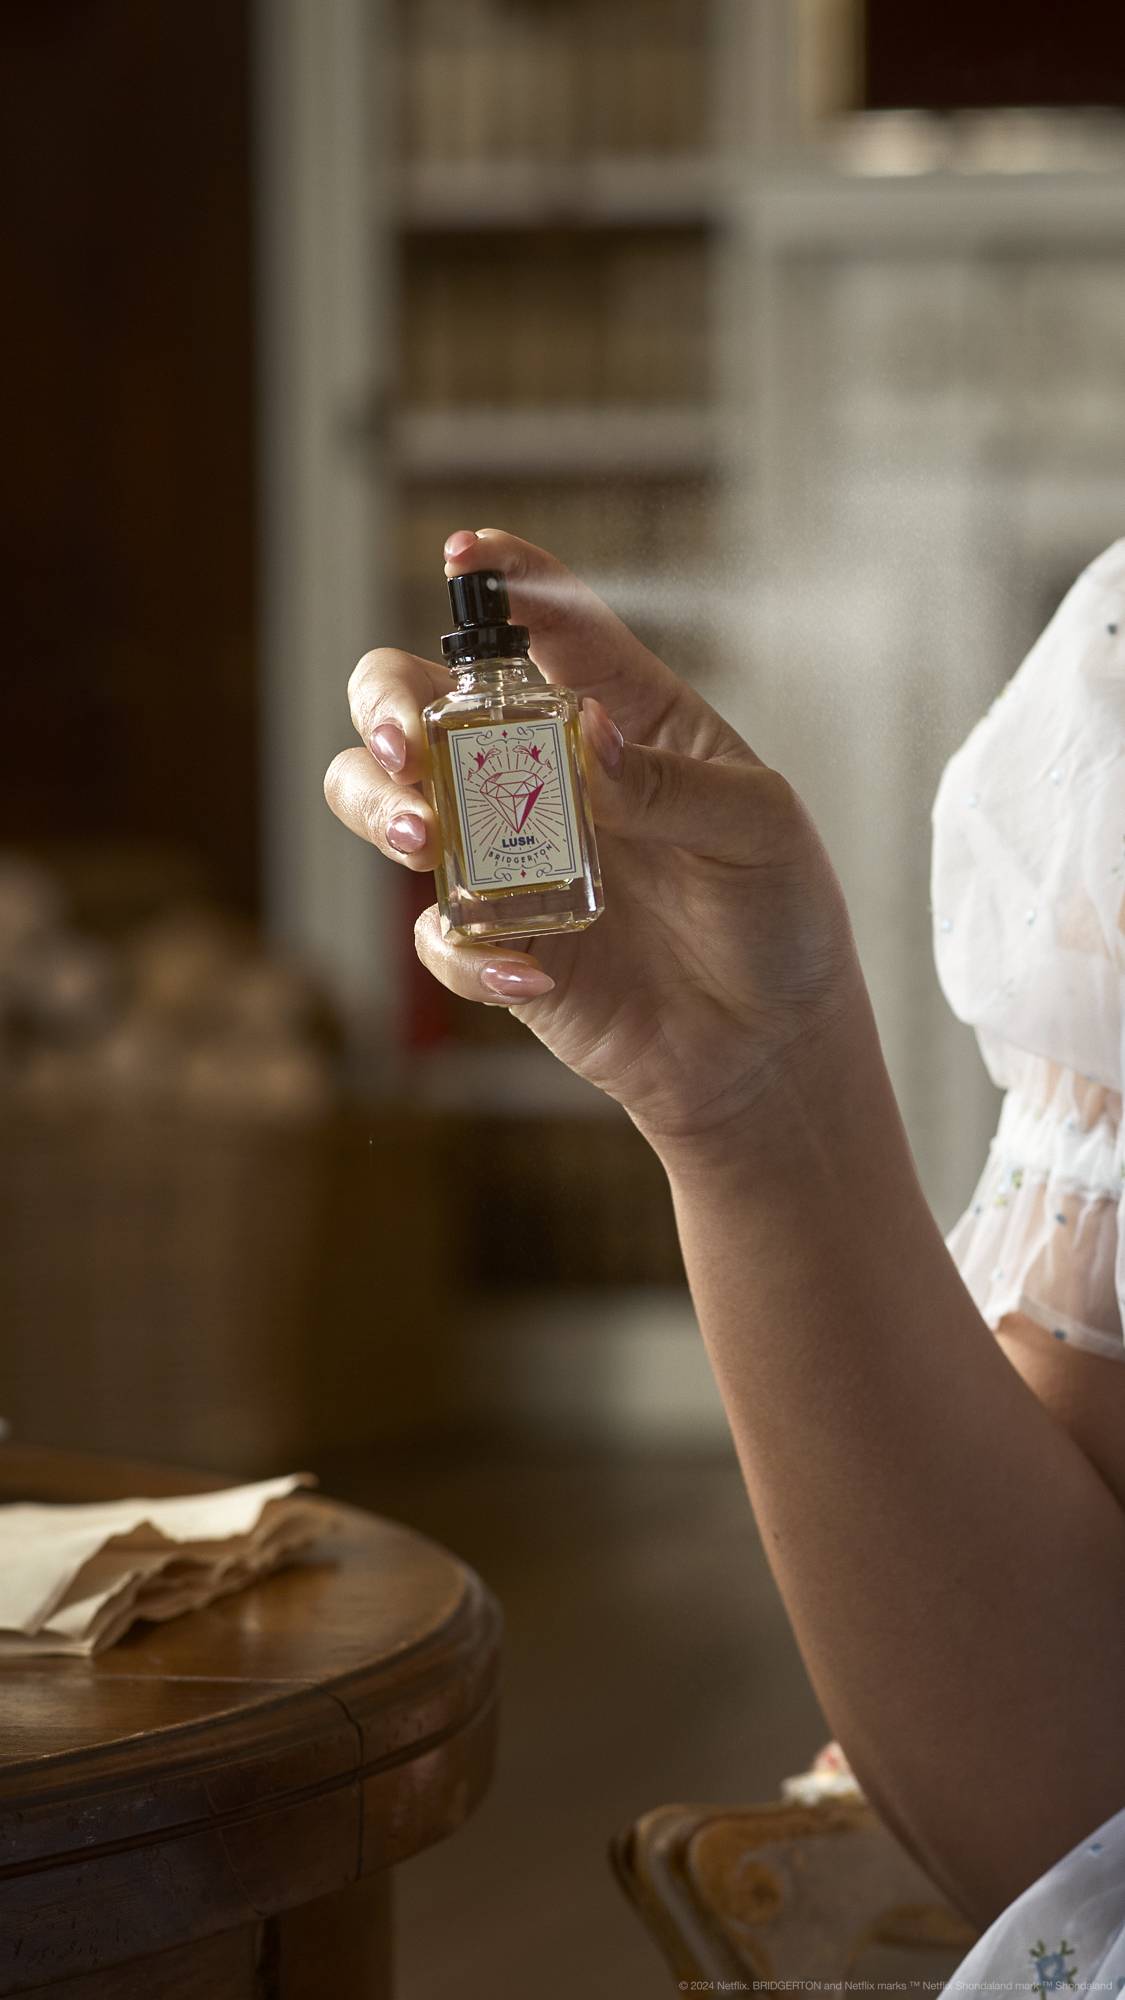 A close-up image of the model's hand holding the LUSH | Bridgerton perfume bottle as they are-mid spritz.